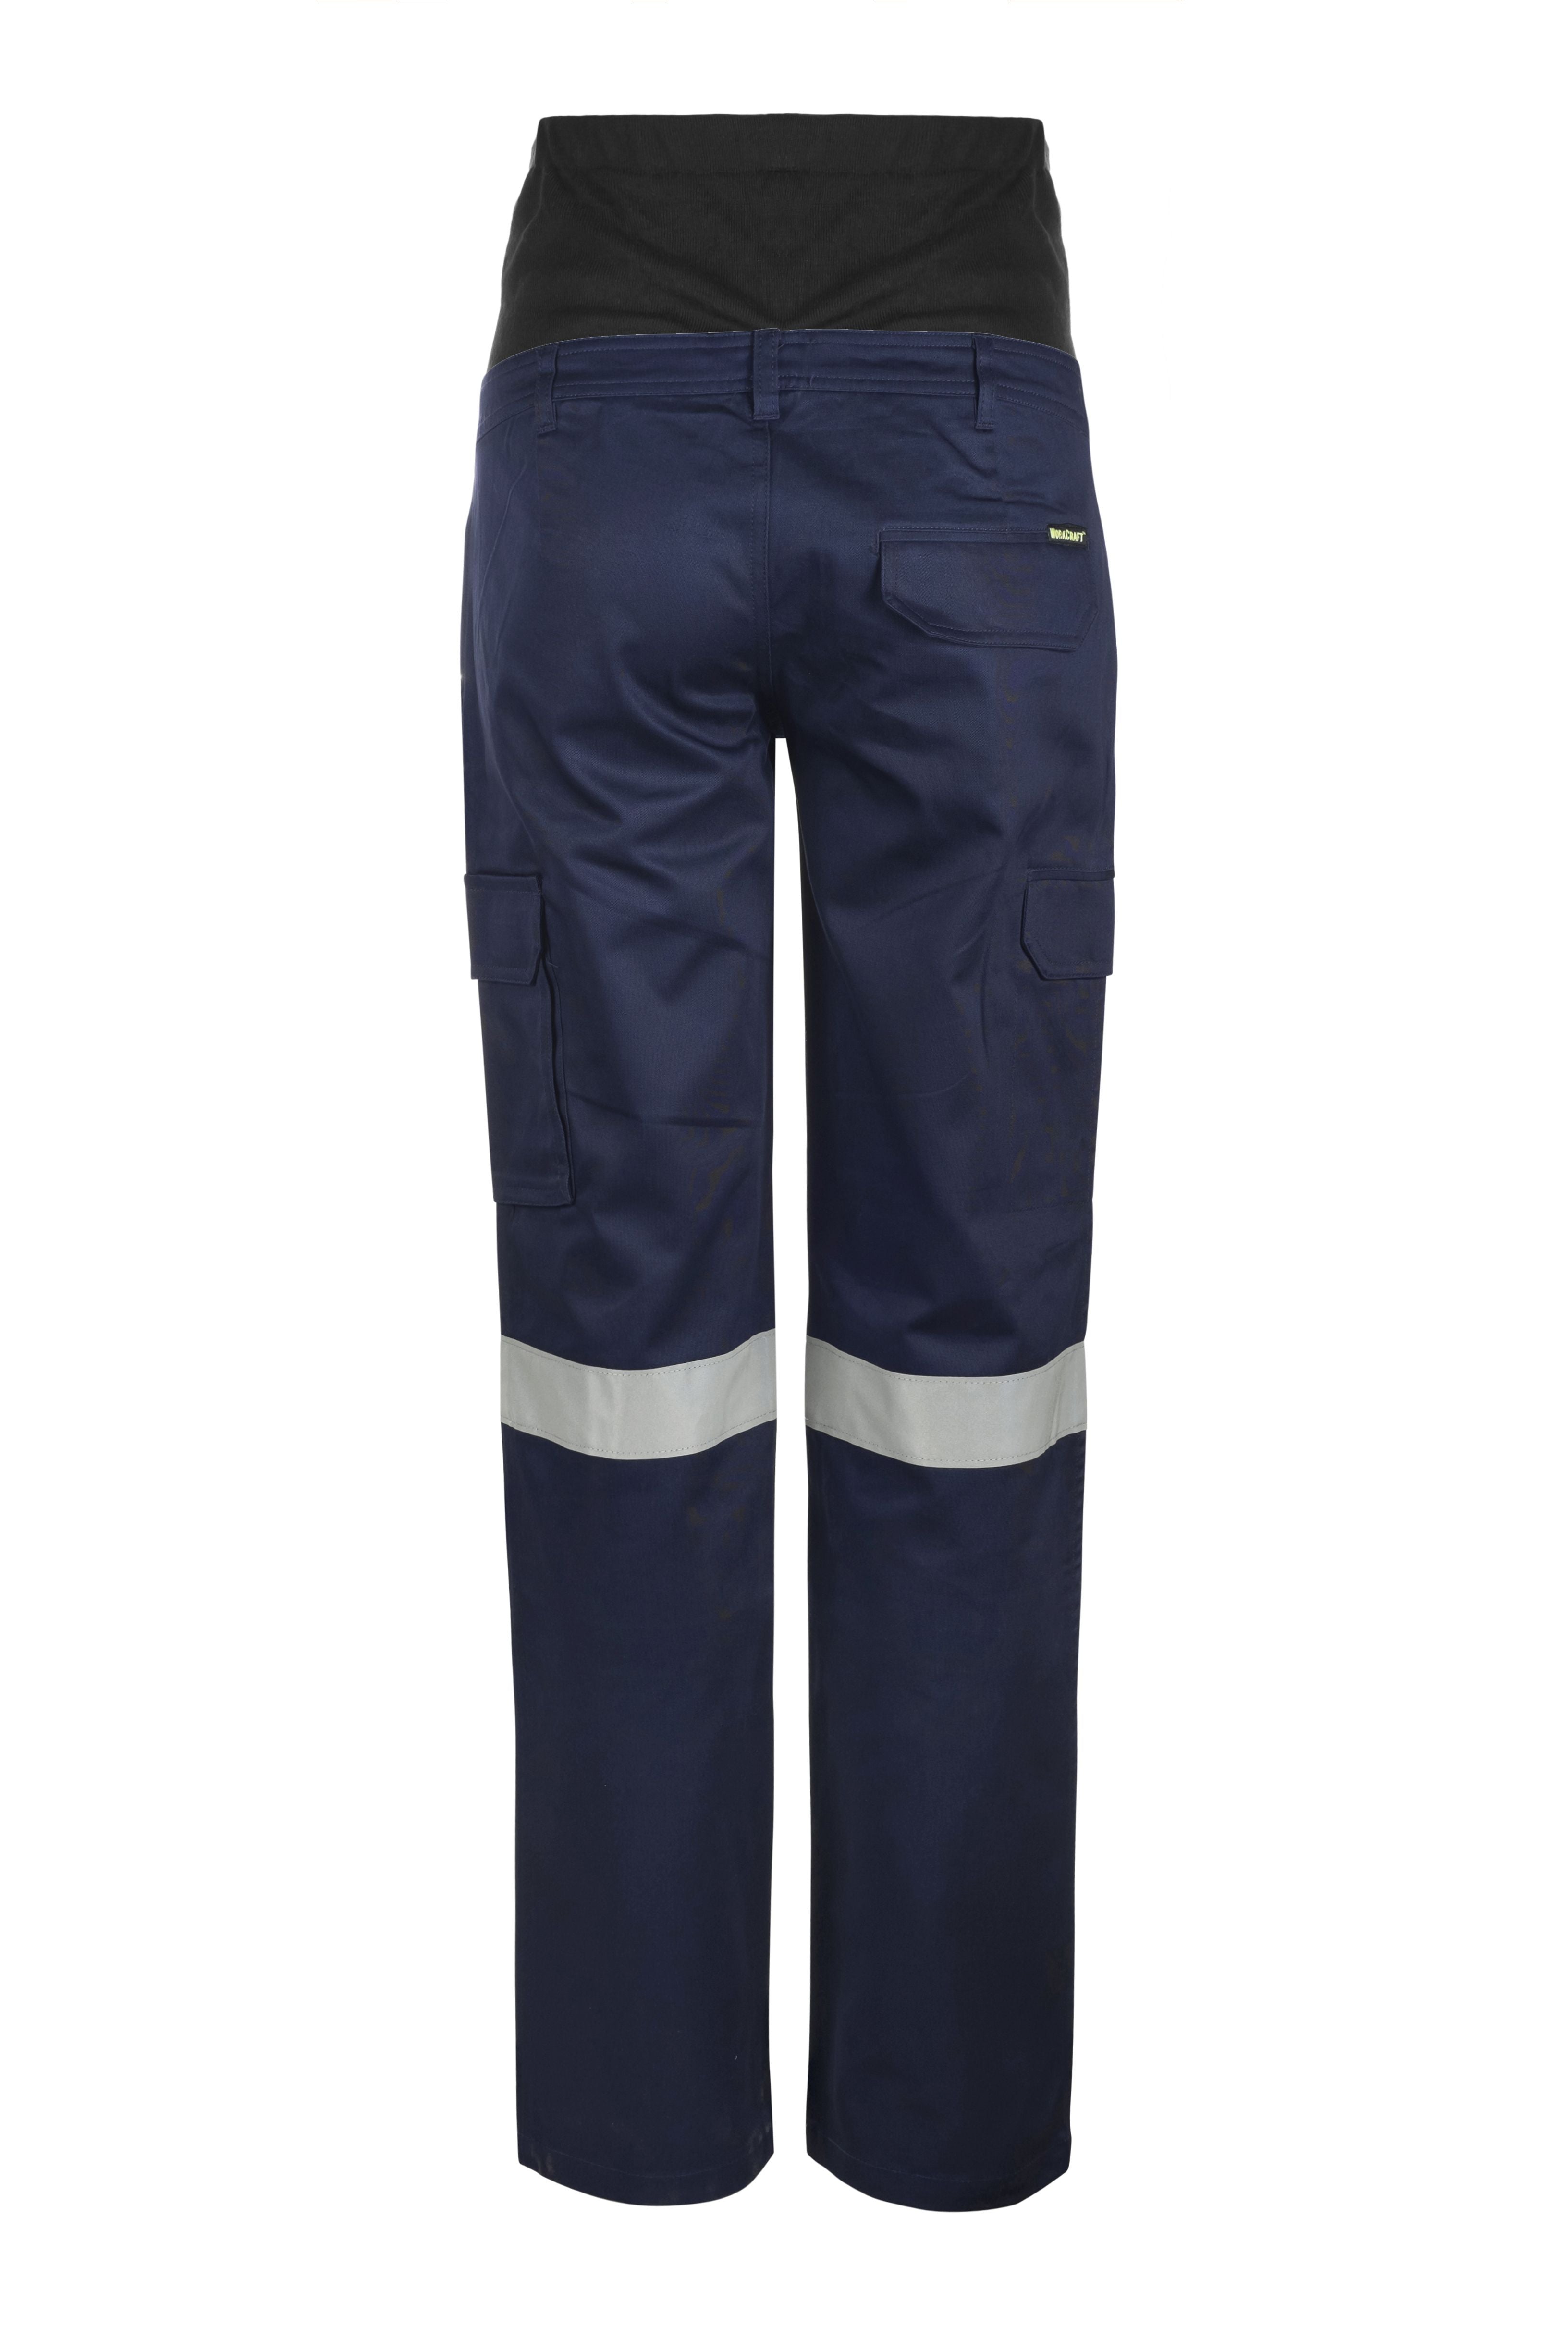 WorkCraft Womens Navy Taped Maternity Cargo Pants 245g 6 - Safe1